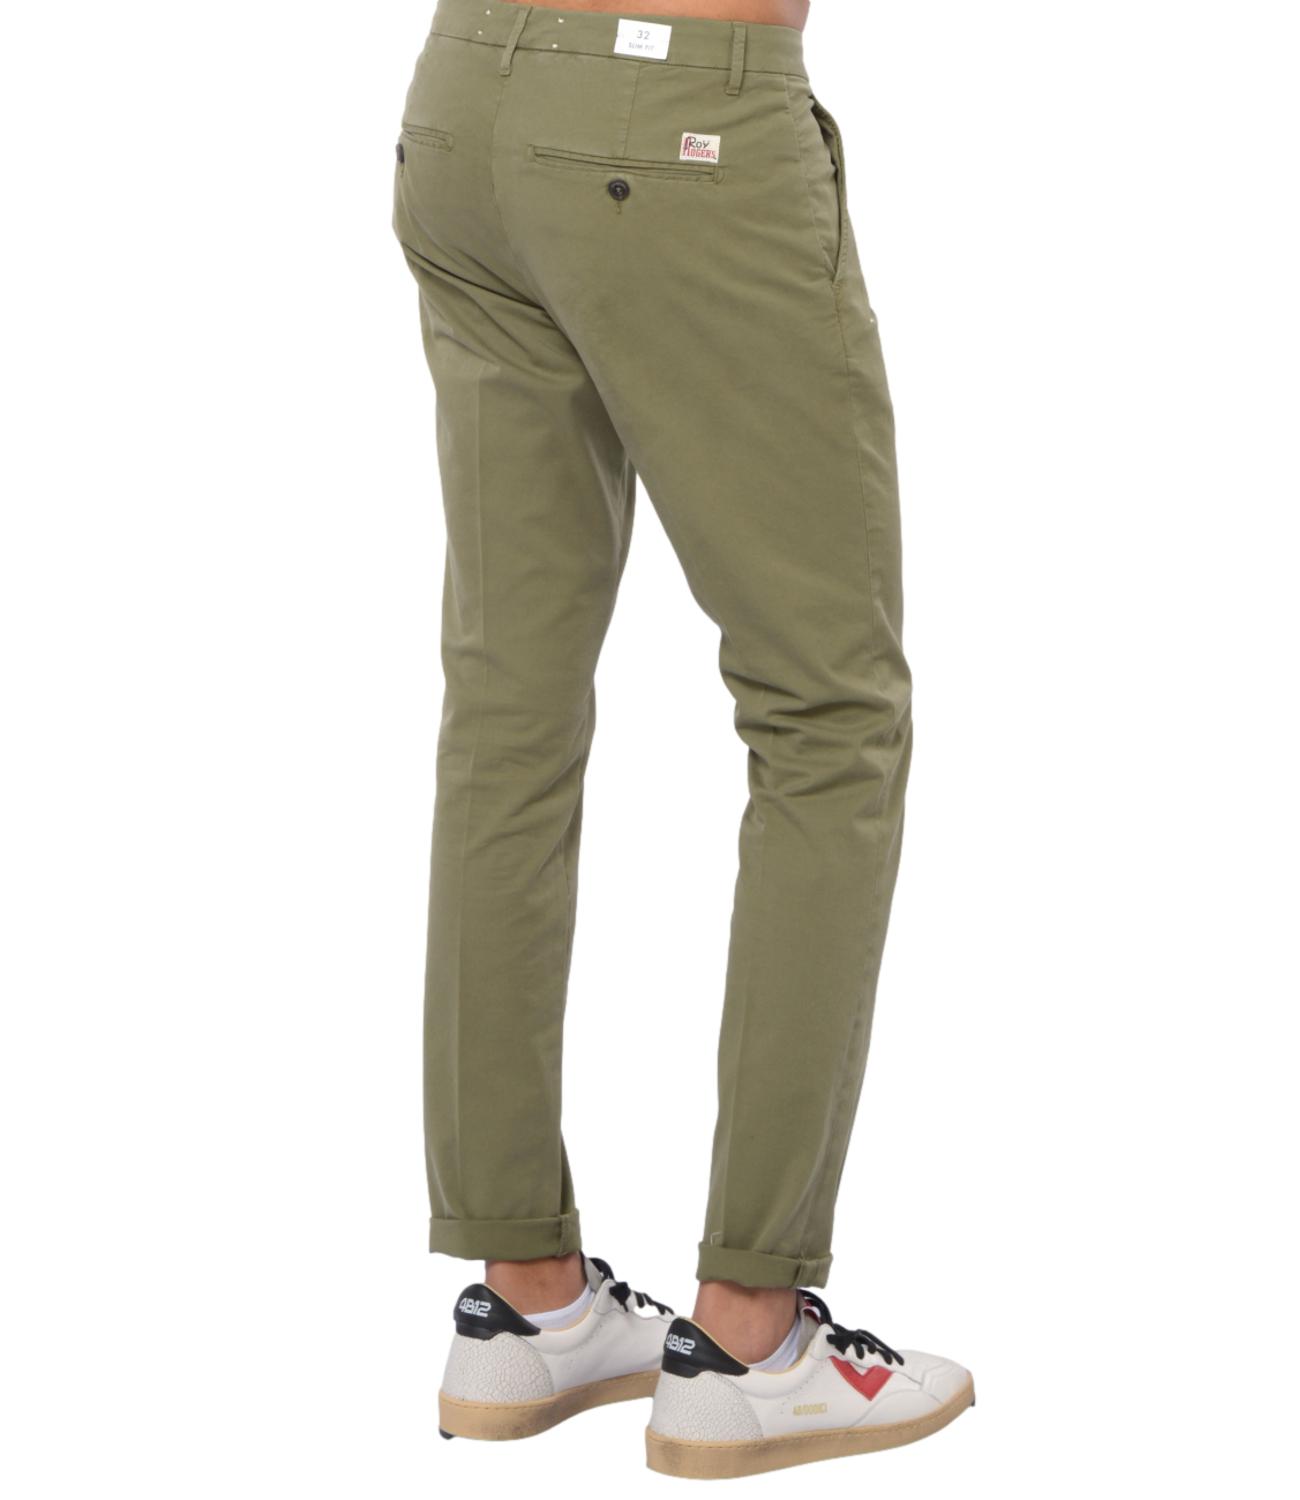 Roy roger's pantalone New Rolf colore verde olive